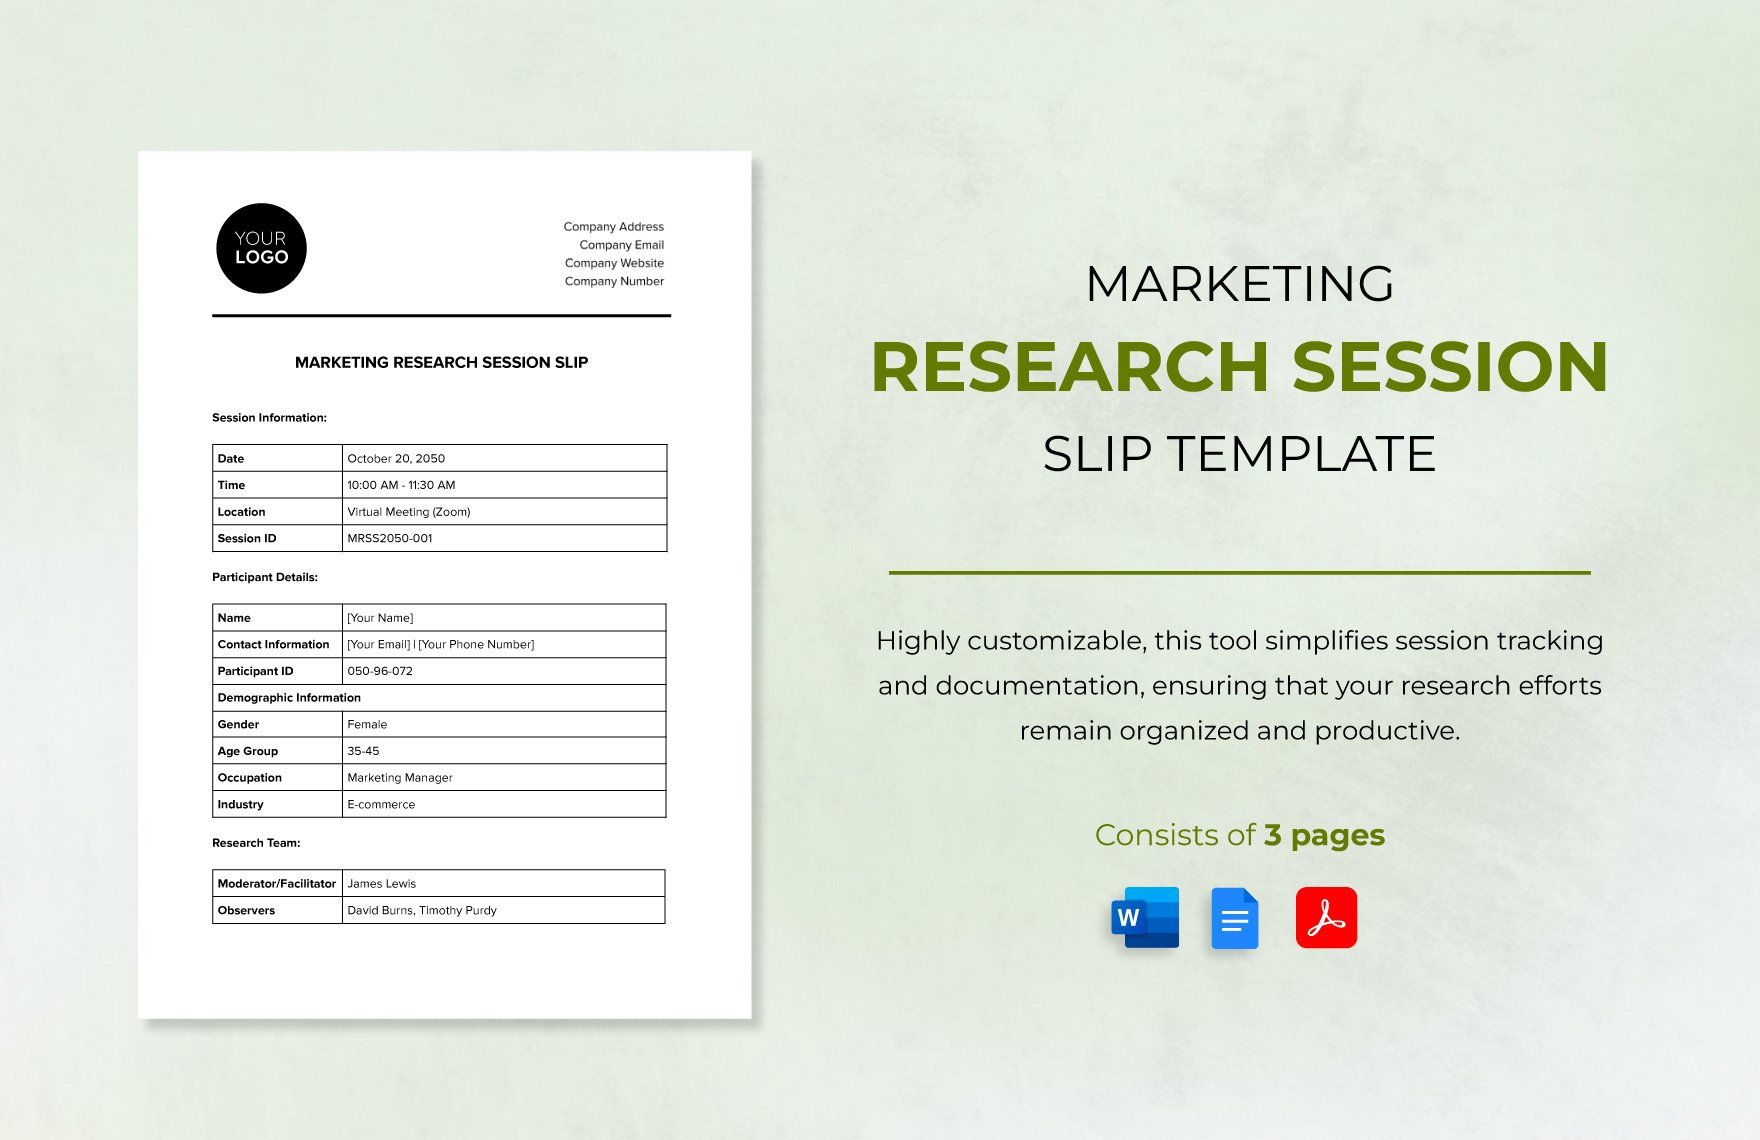 Marketing Research Session Slip Template in Word, Google Docs, PDF